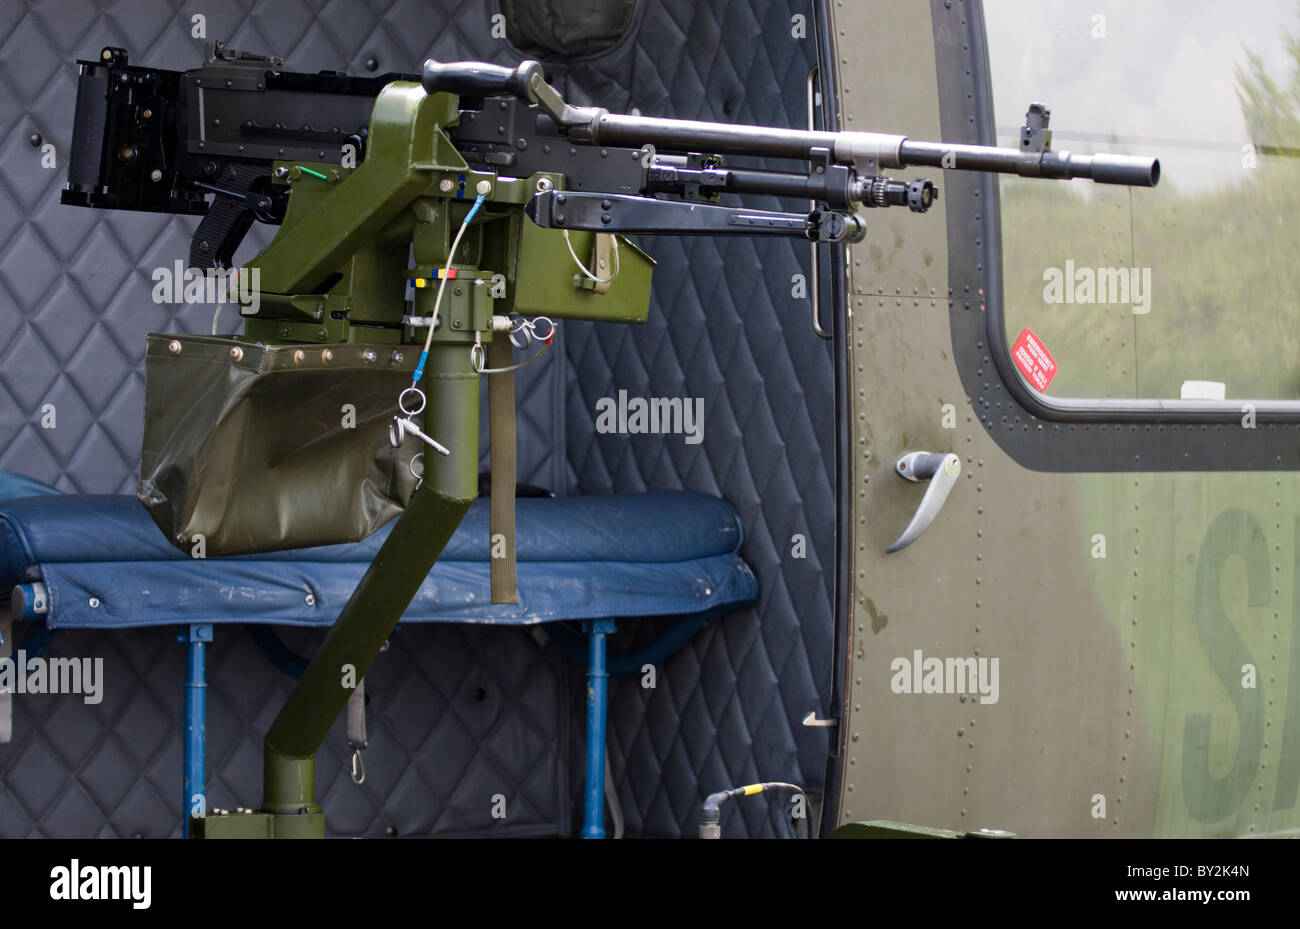 Machine gun mounted by the side of the helicopter. Stock Photo